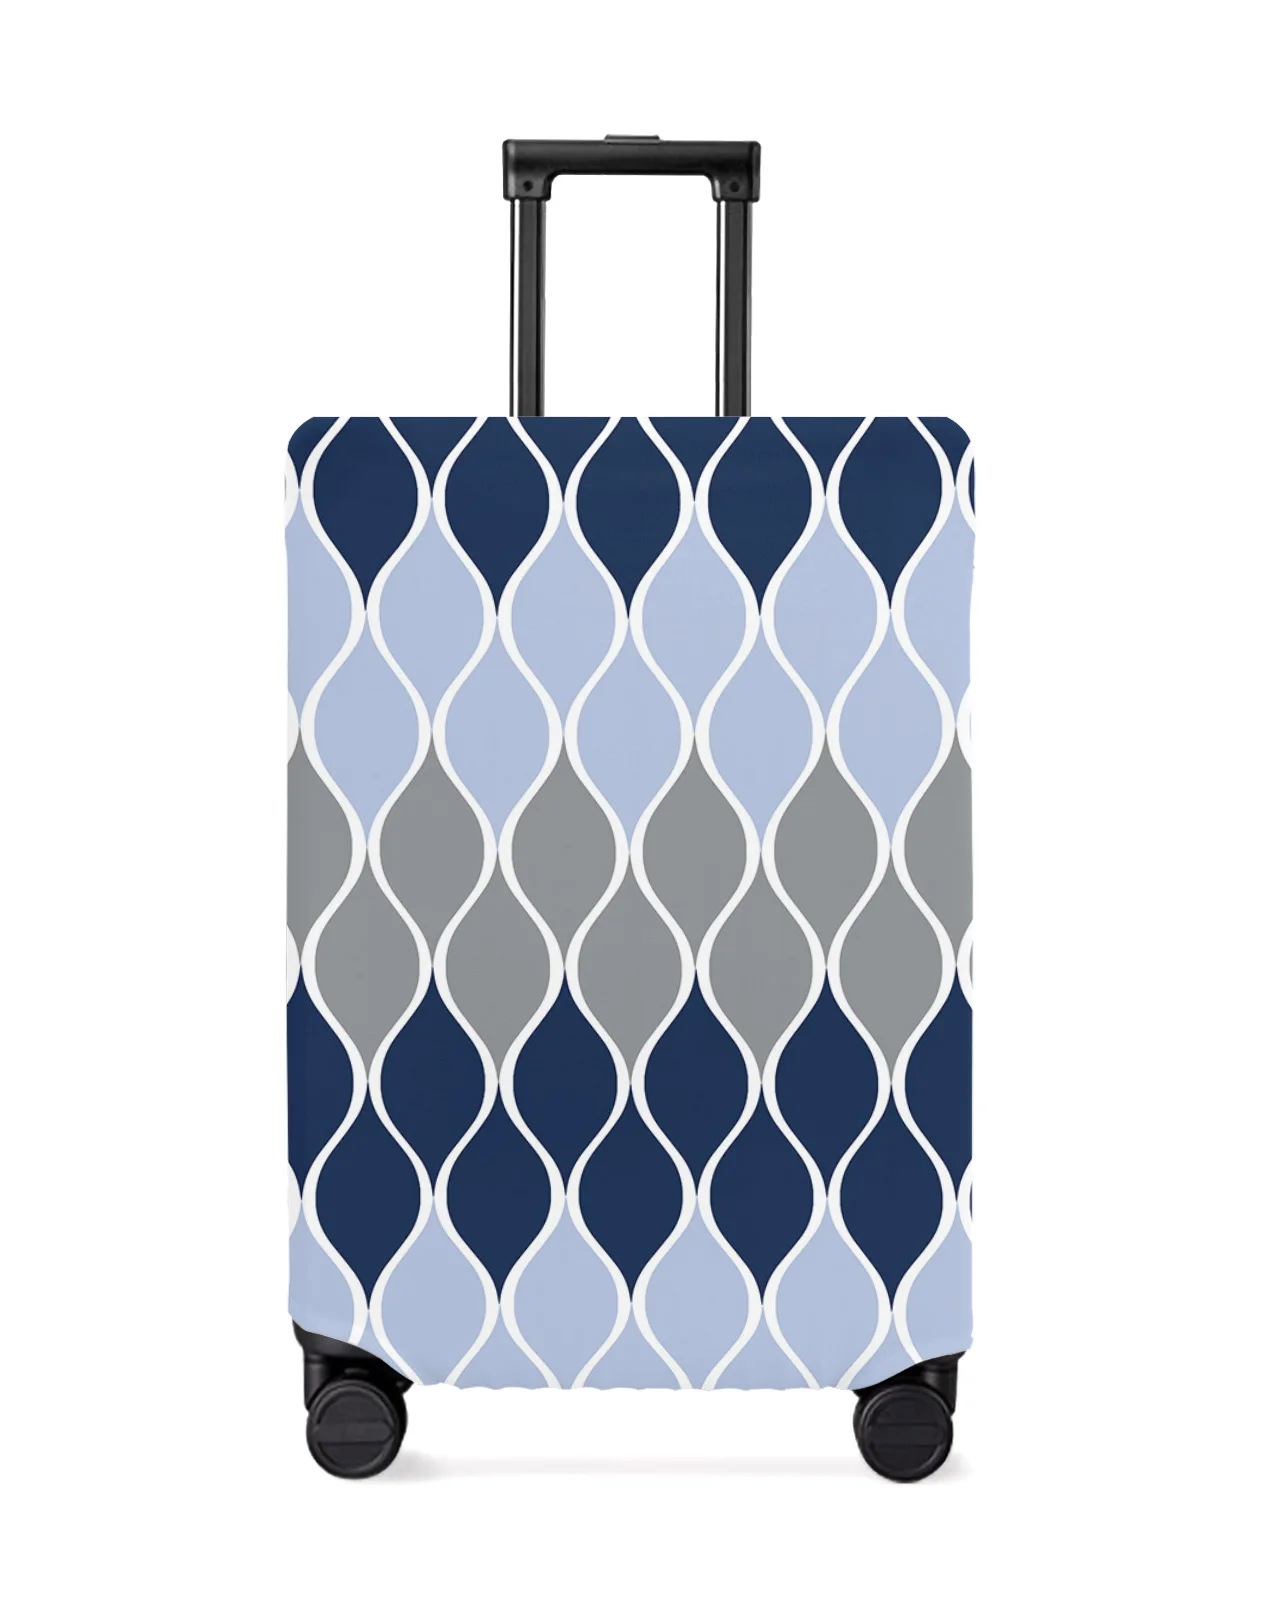 geometric-blue-grey-medieval-travel-luggage-cover-elastic-baggage-cover-suitcase-case-dust-cover-travel-accessories